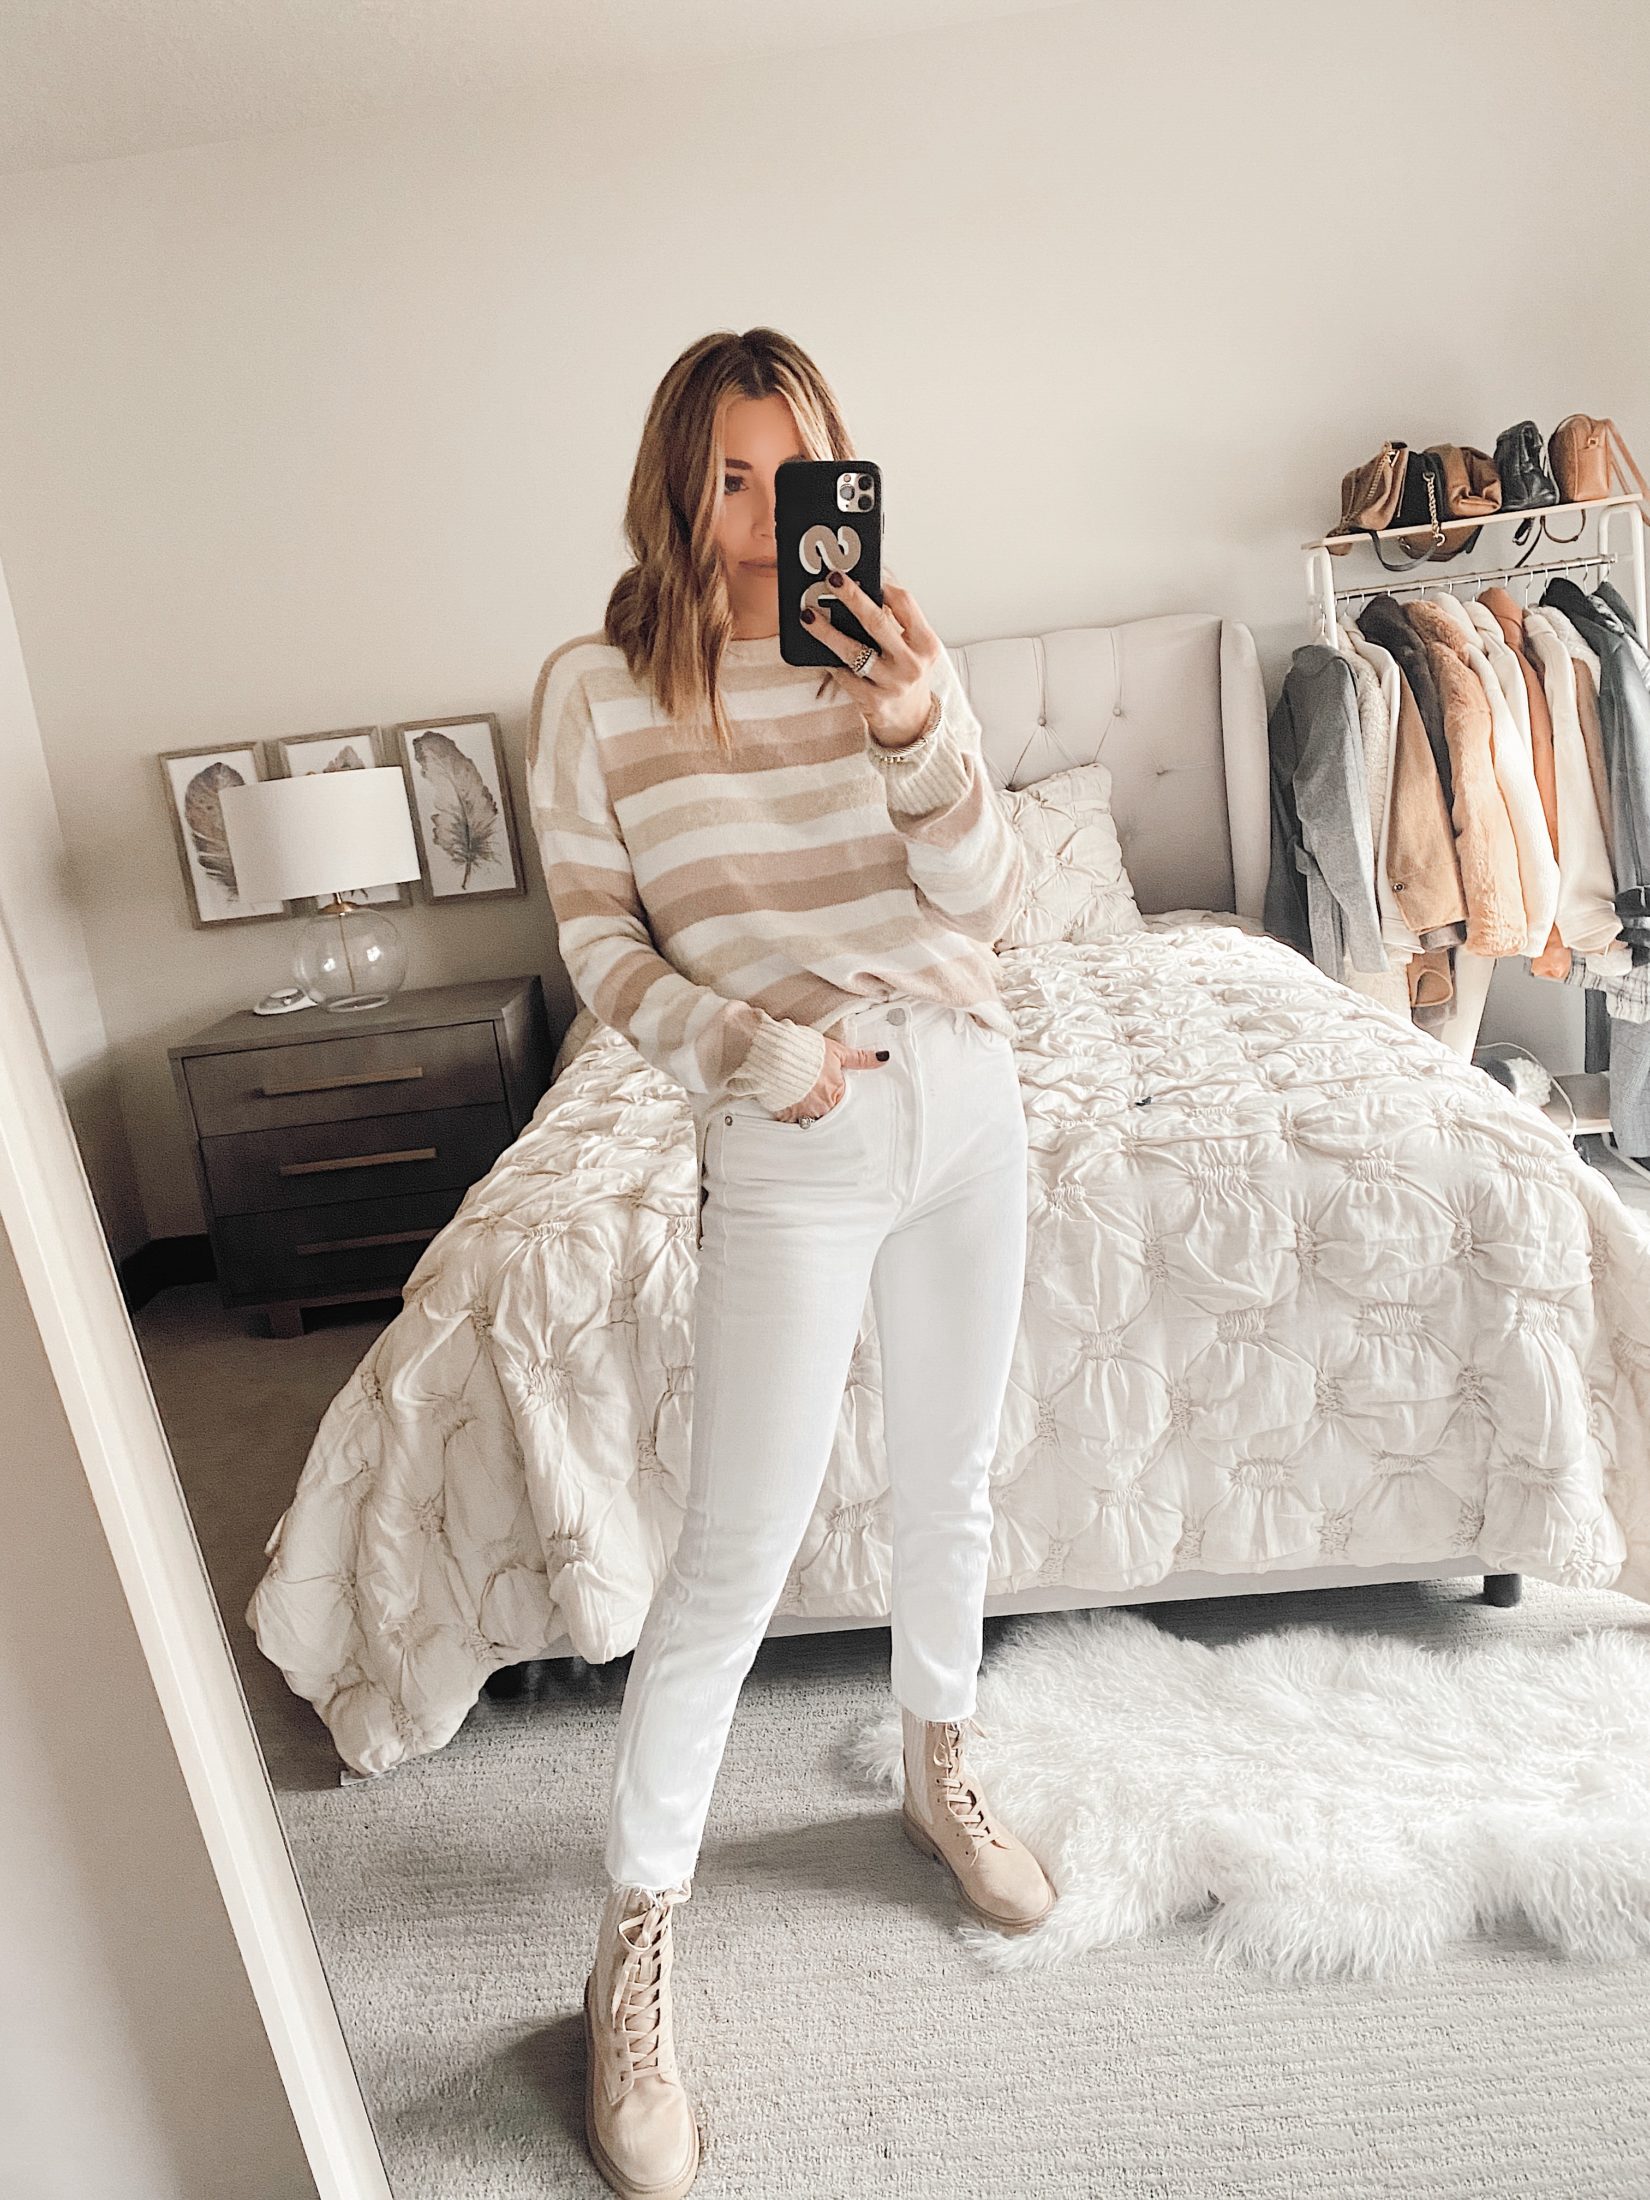 jaime shrayber wearing walmart time and tru stripe sweater with white jeans